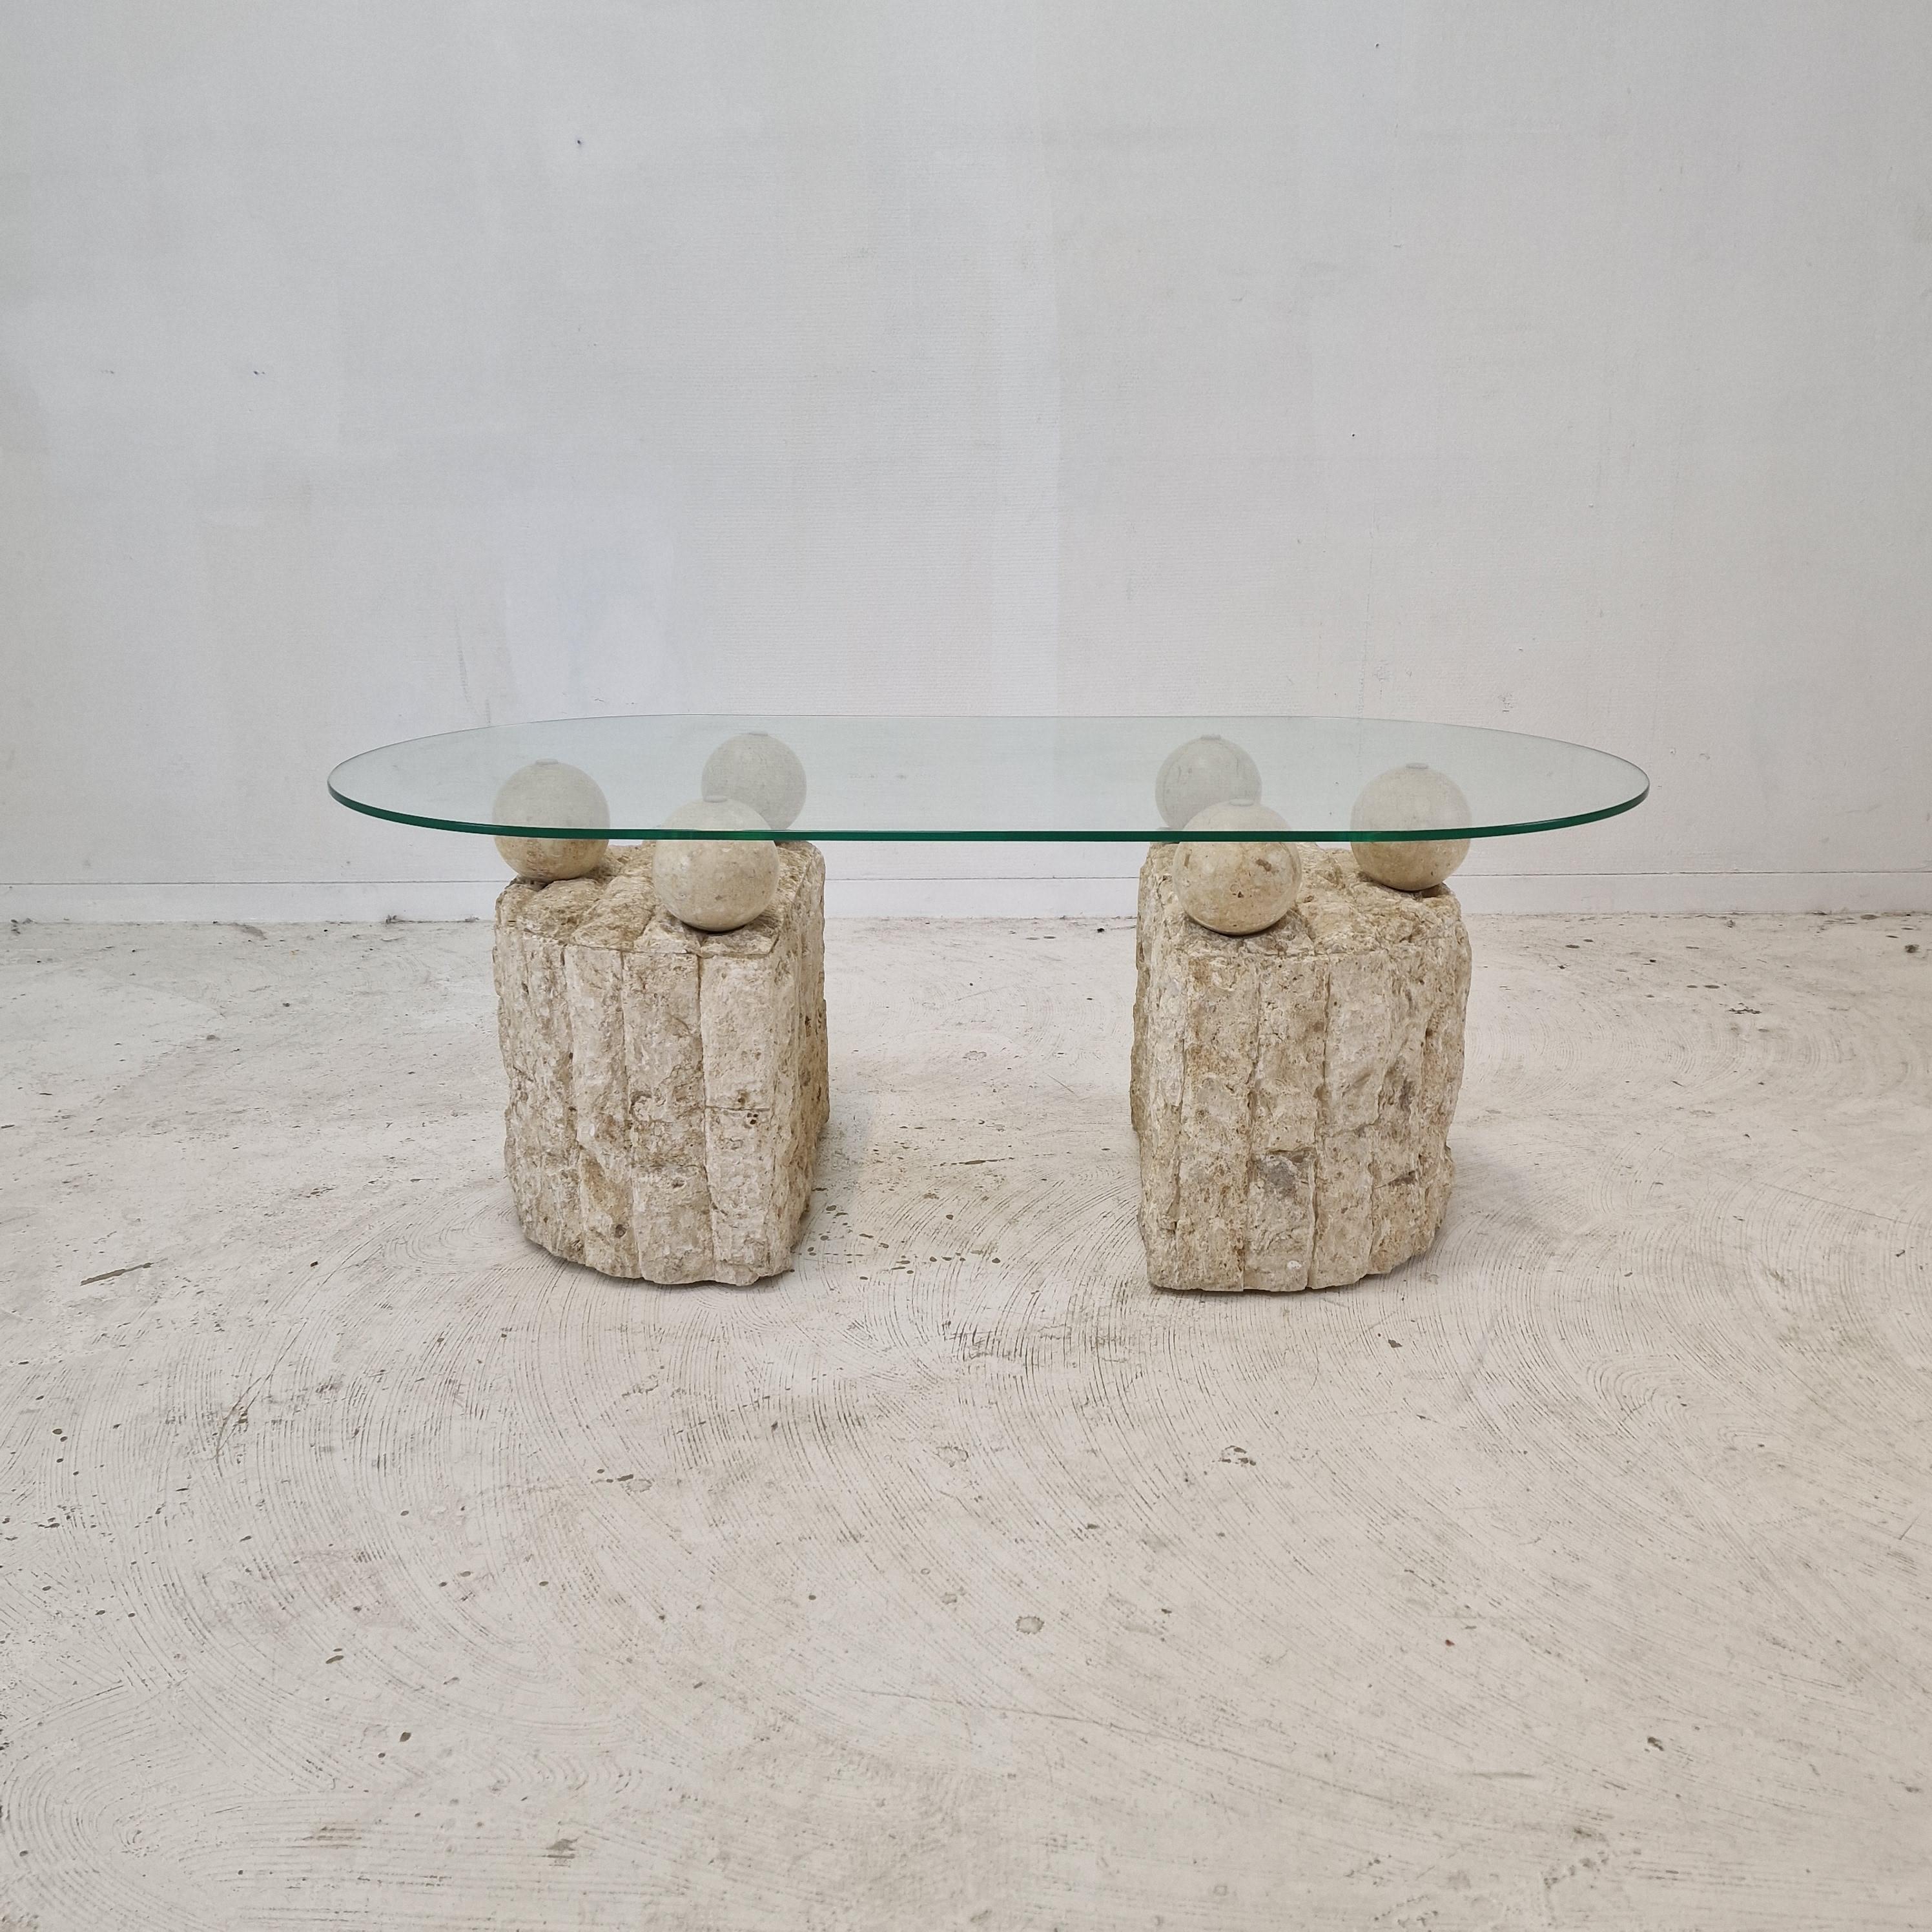 Lovely Postmodern 1980s design, coffee or side table by Magnussen Ponte.

The base of this cute table is made of rough edged brick motif Mactan stone or Fossil Stone. 

Six stone balls holding the removable glass plate.
The table is in very good